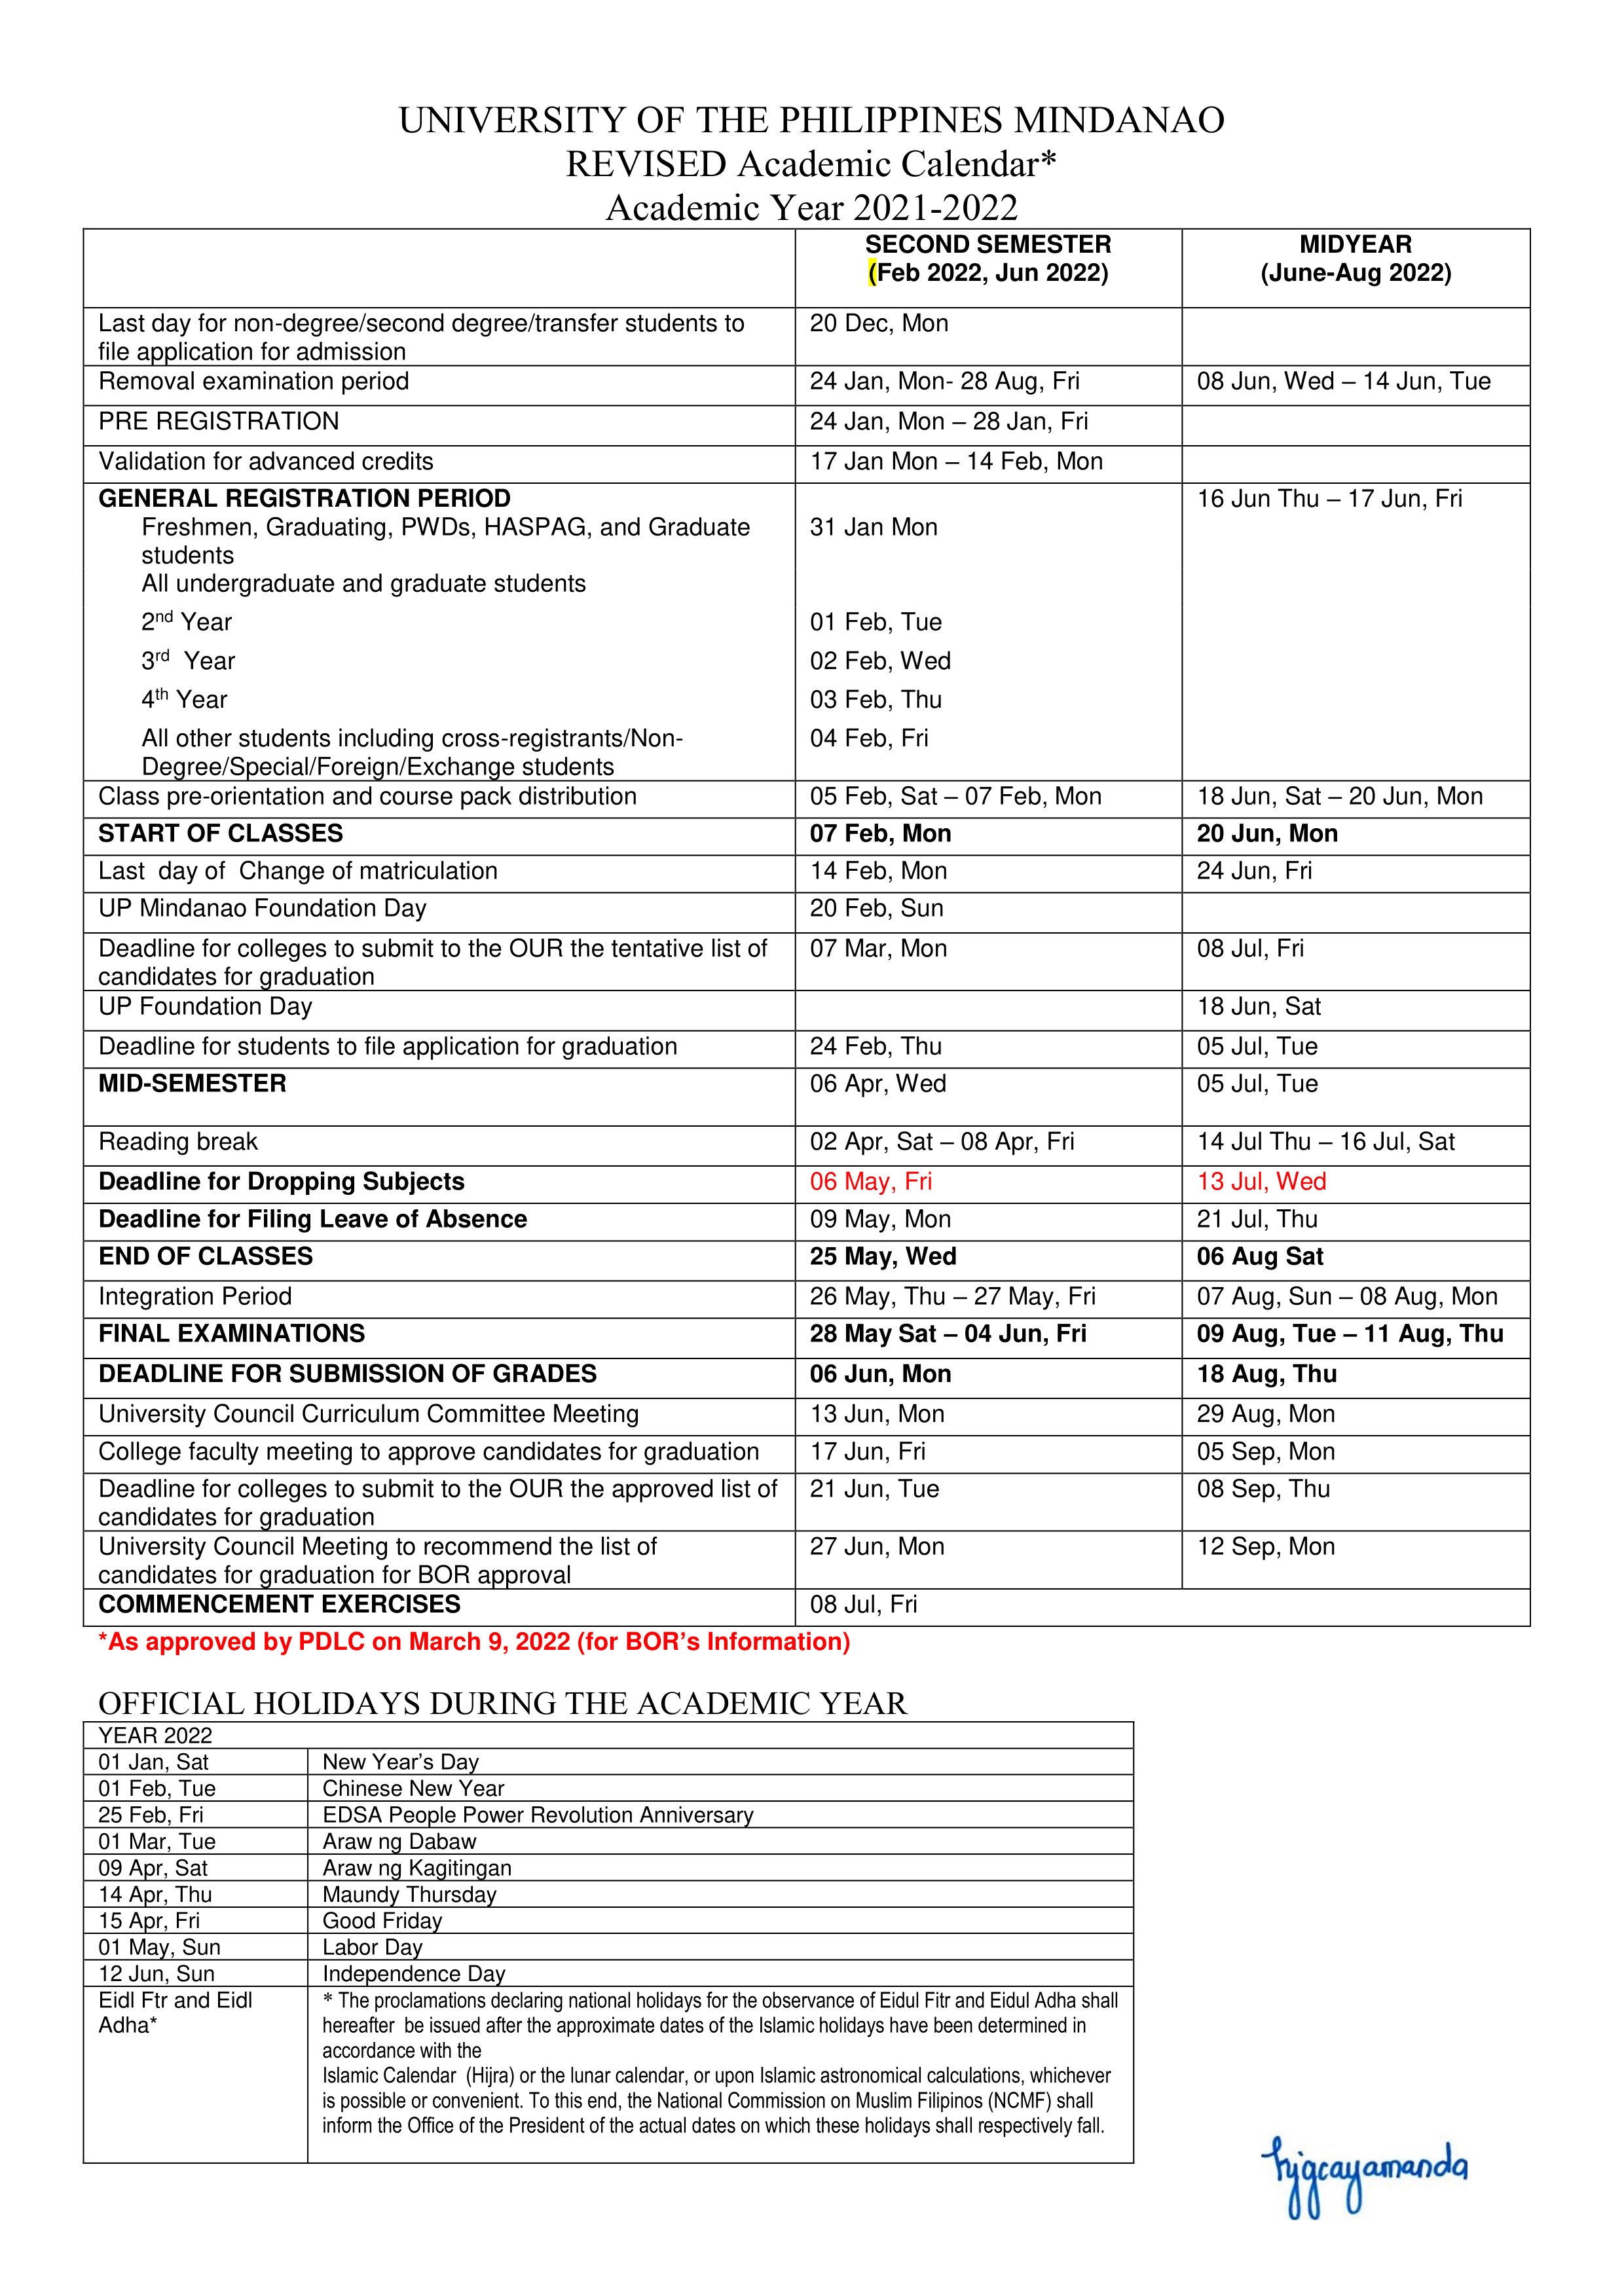 [updated] REVISED Academic Calendar 20212022 [24 March 2022]